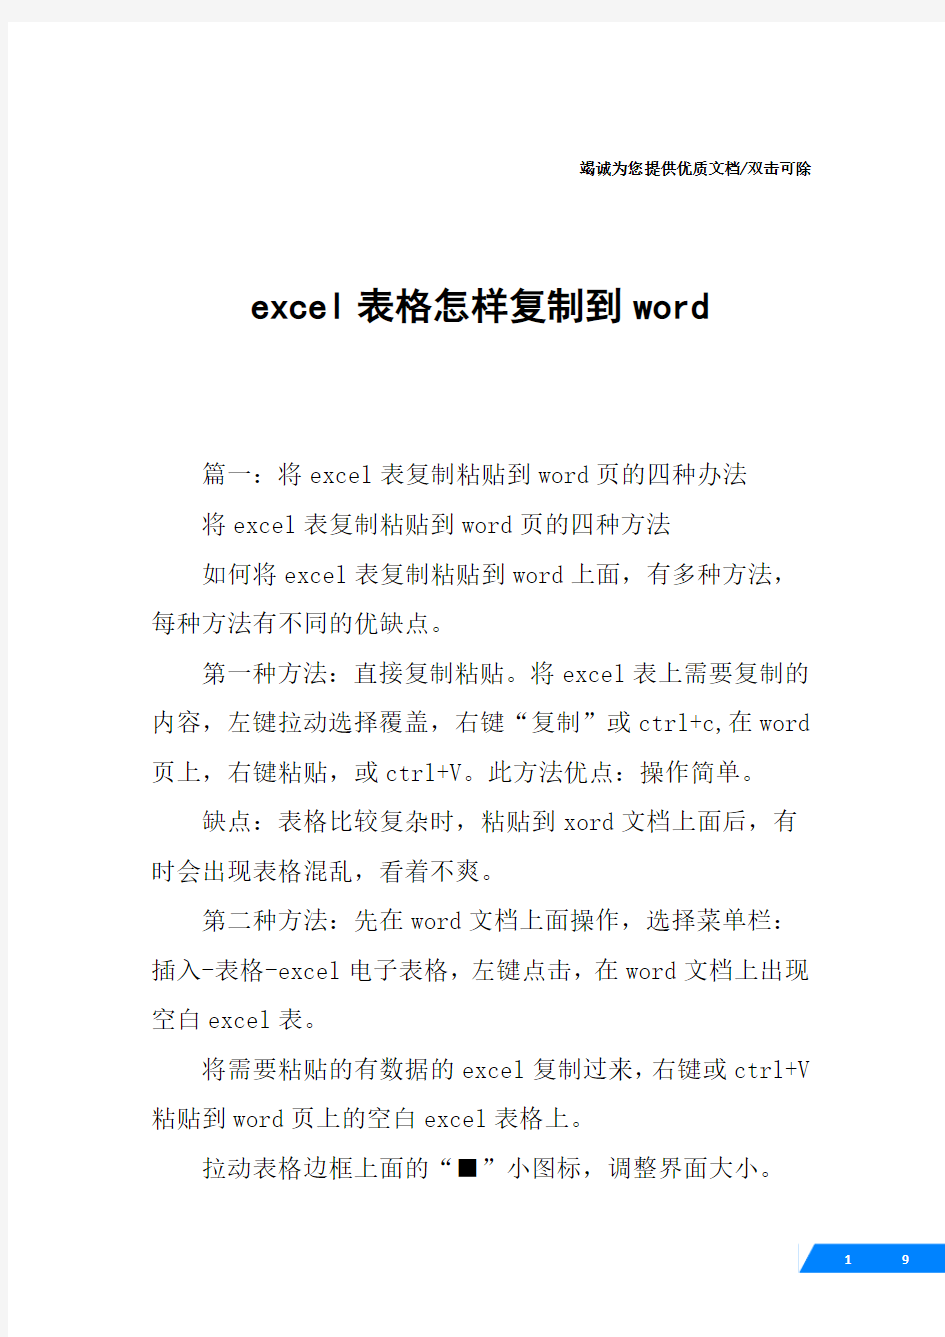 excel表格怎样复制到word